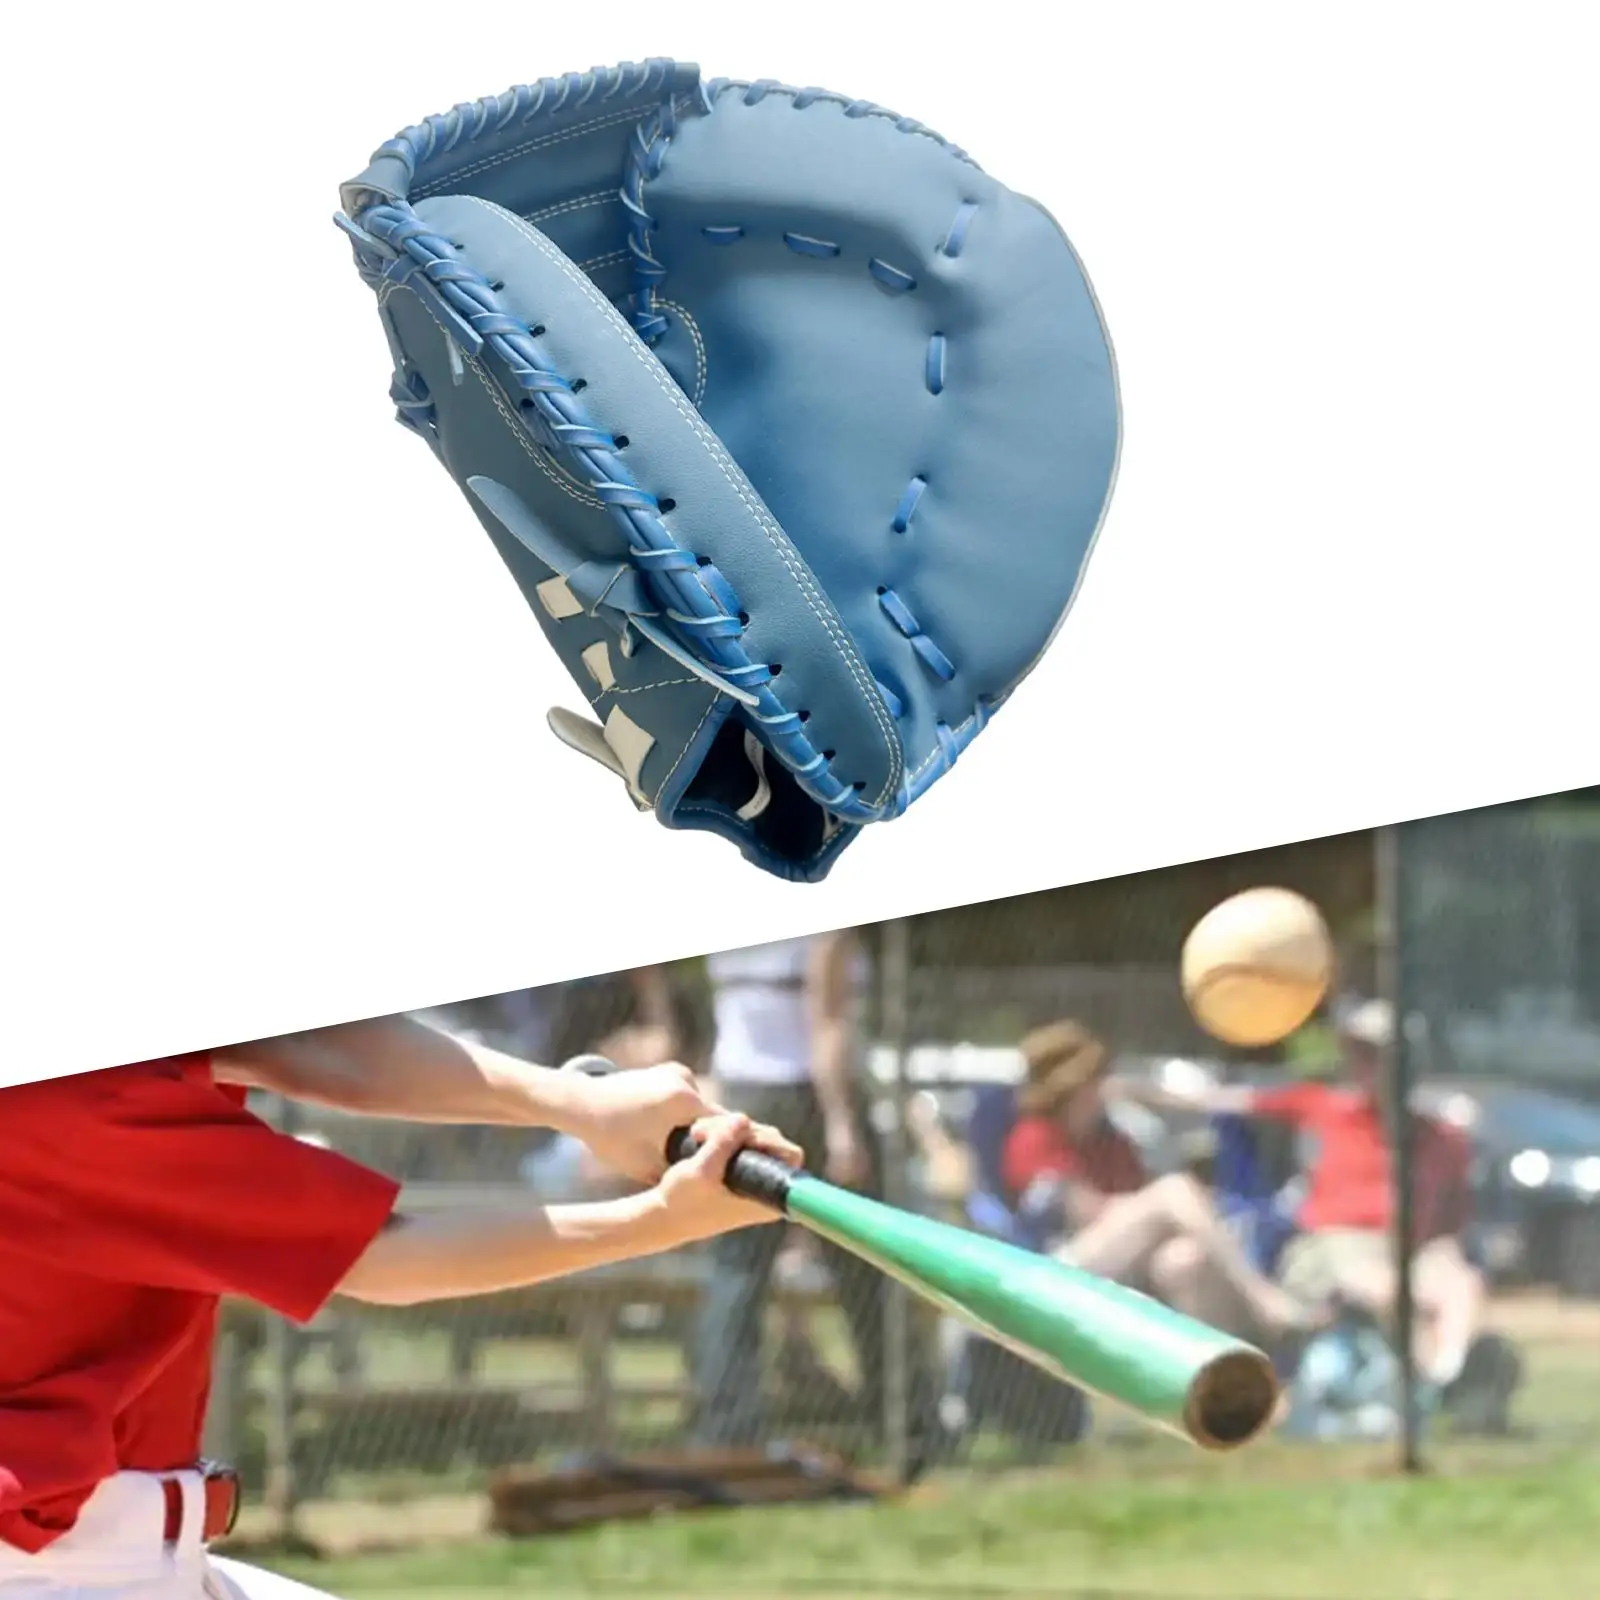 Baseball Glove Softball Mitt Durable Adults Right Hand Throw Infield Gloves for Training Outdoor Sports Exercise Practice